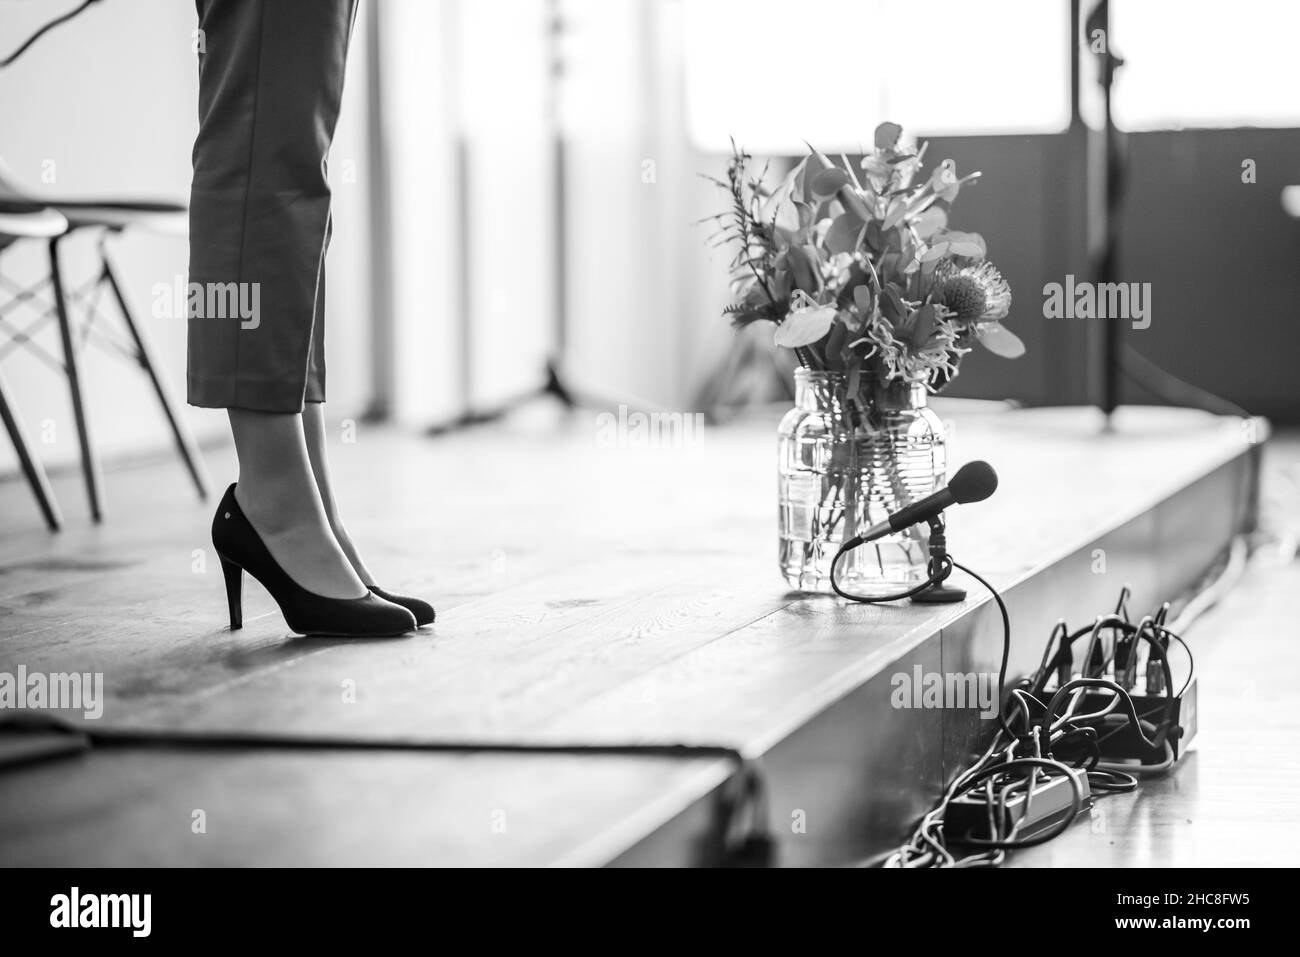 Grayscale shot of a woman's legs visible on a stage next to music equipment and a glassy flower vase Stock Photo